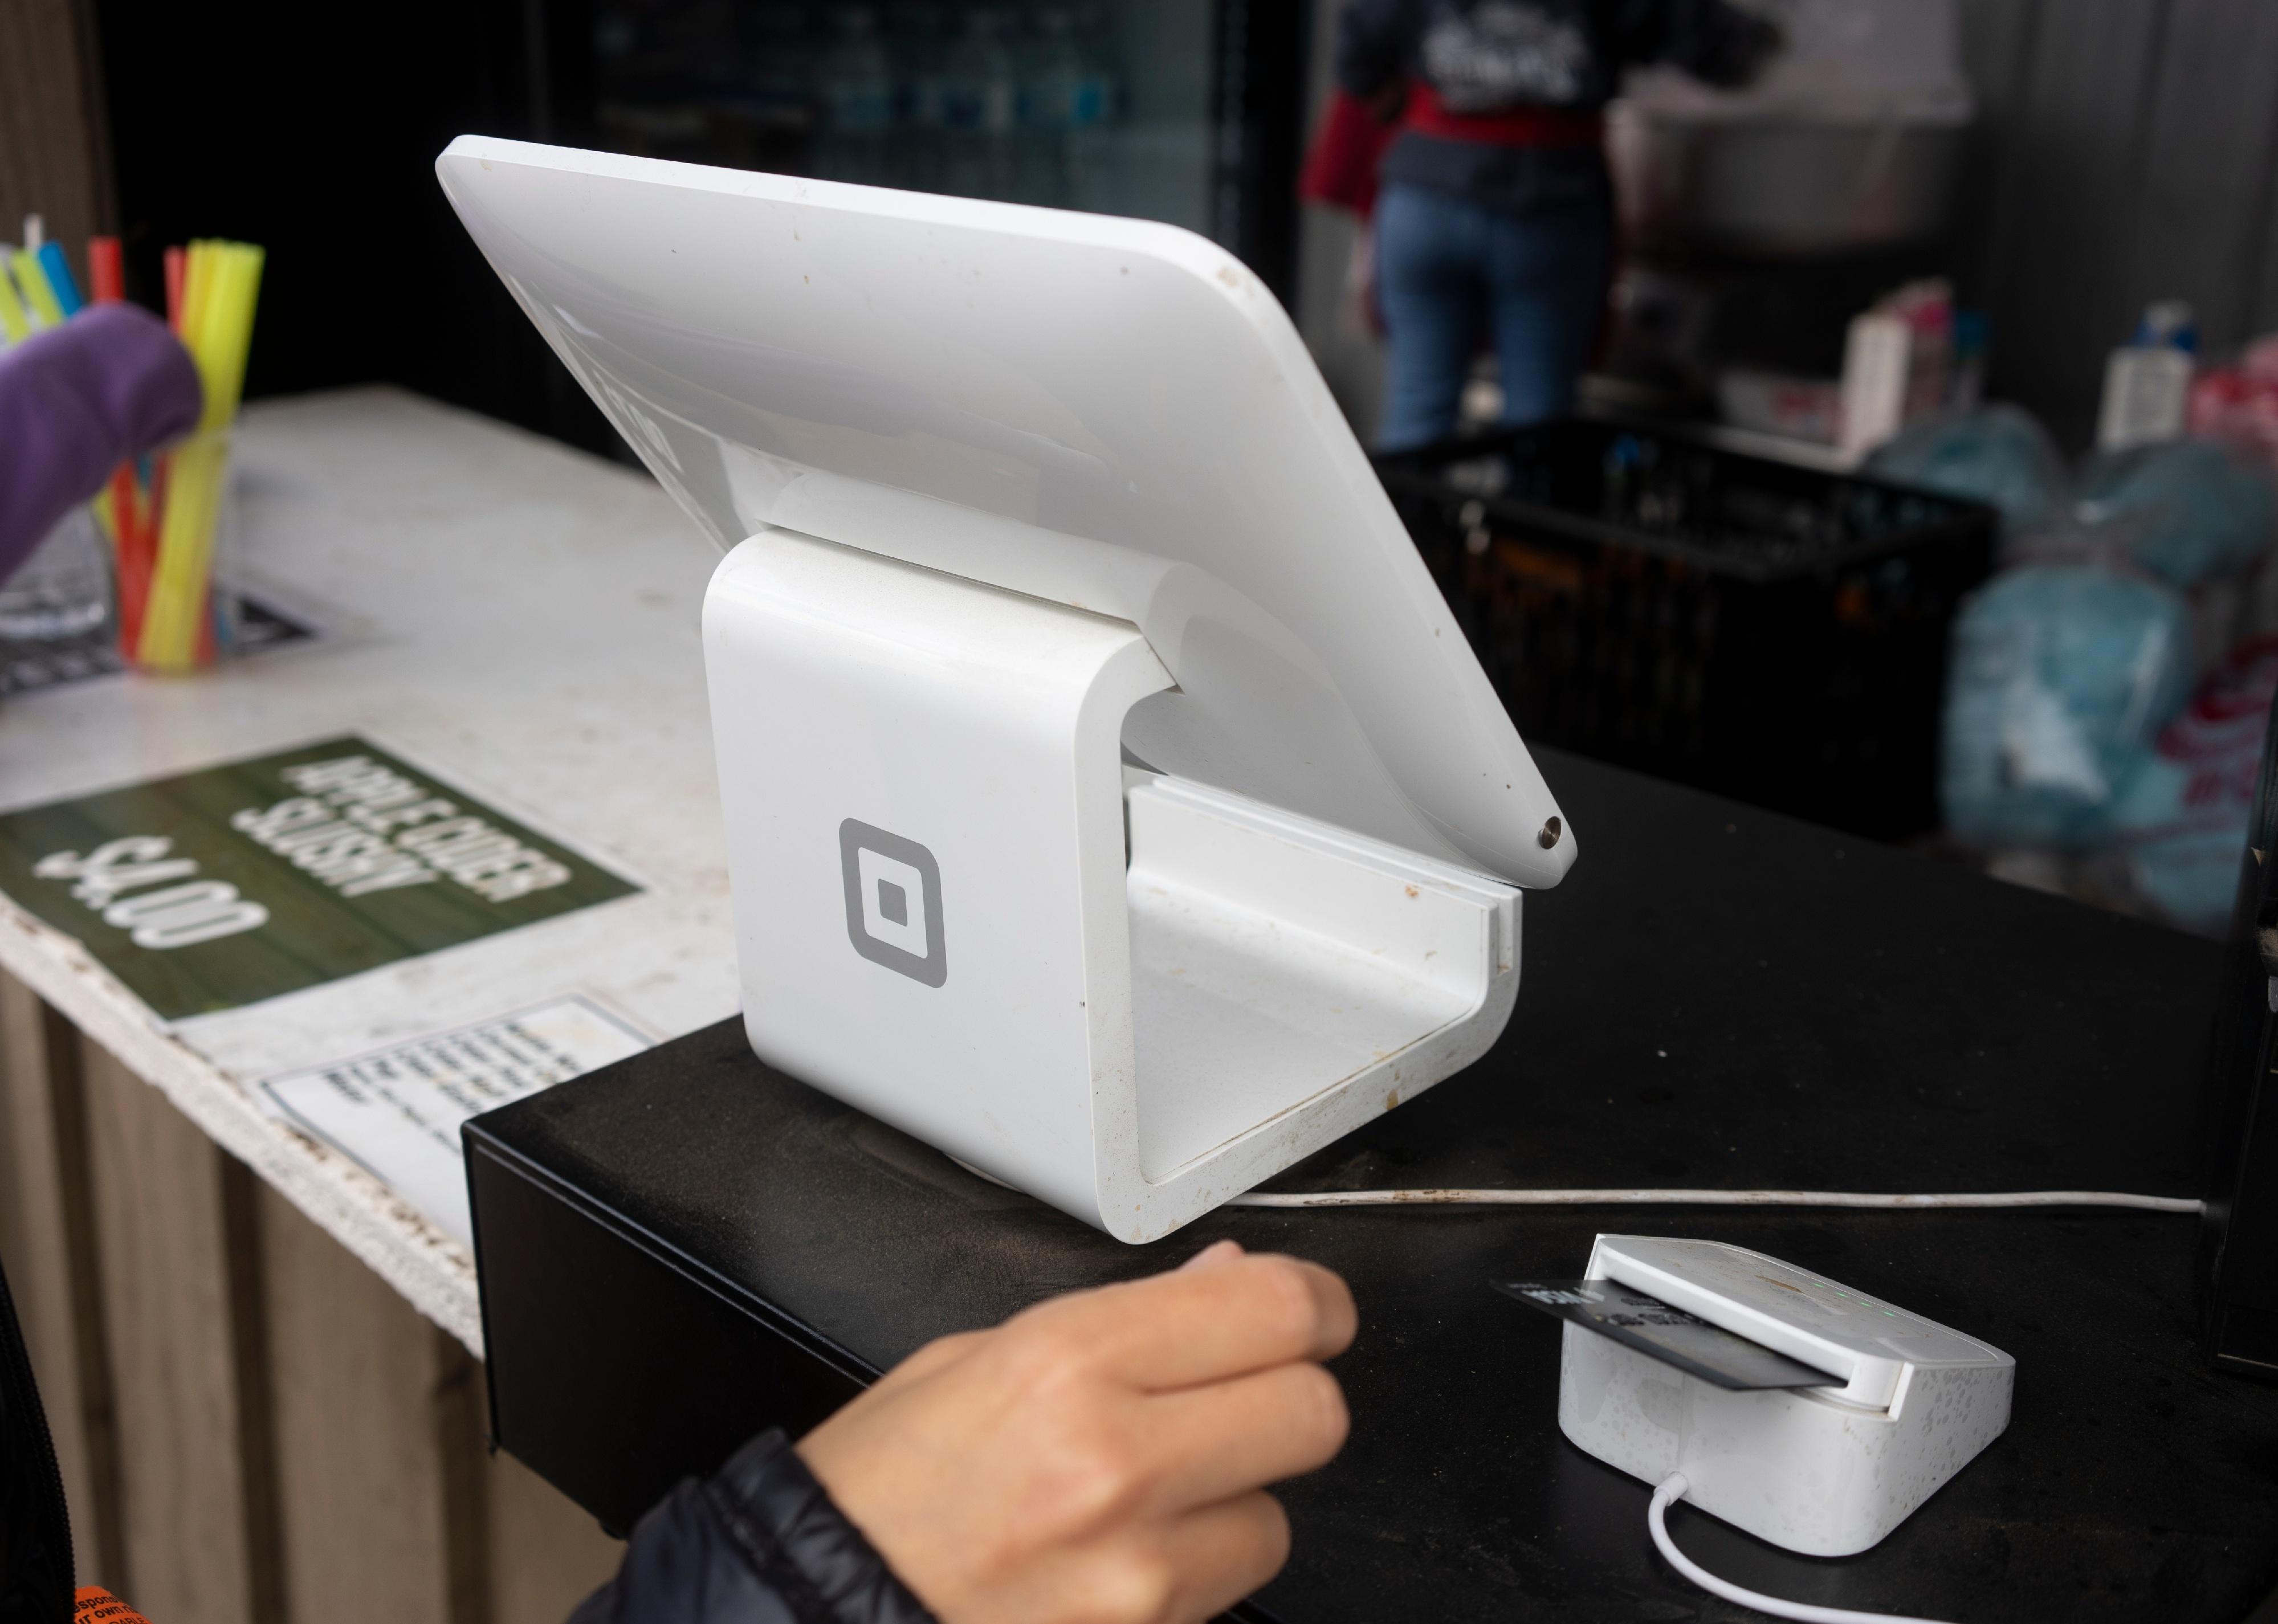 A Block branded POS stand with a chip card reader.